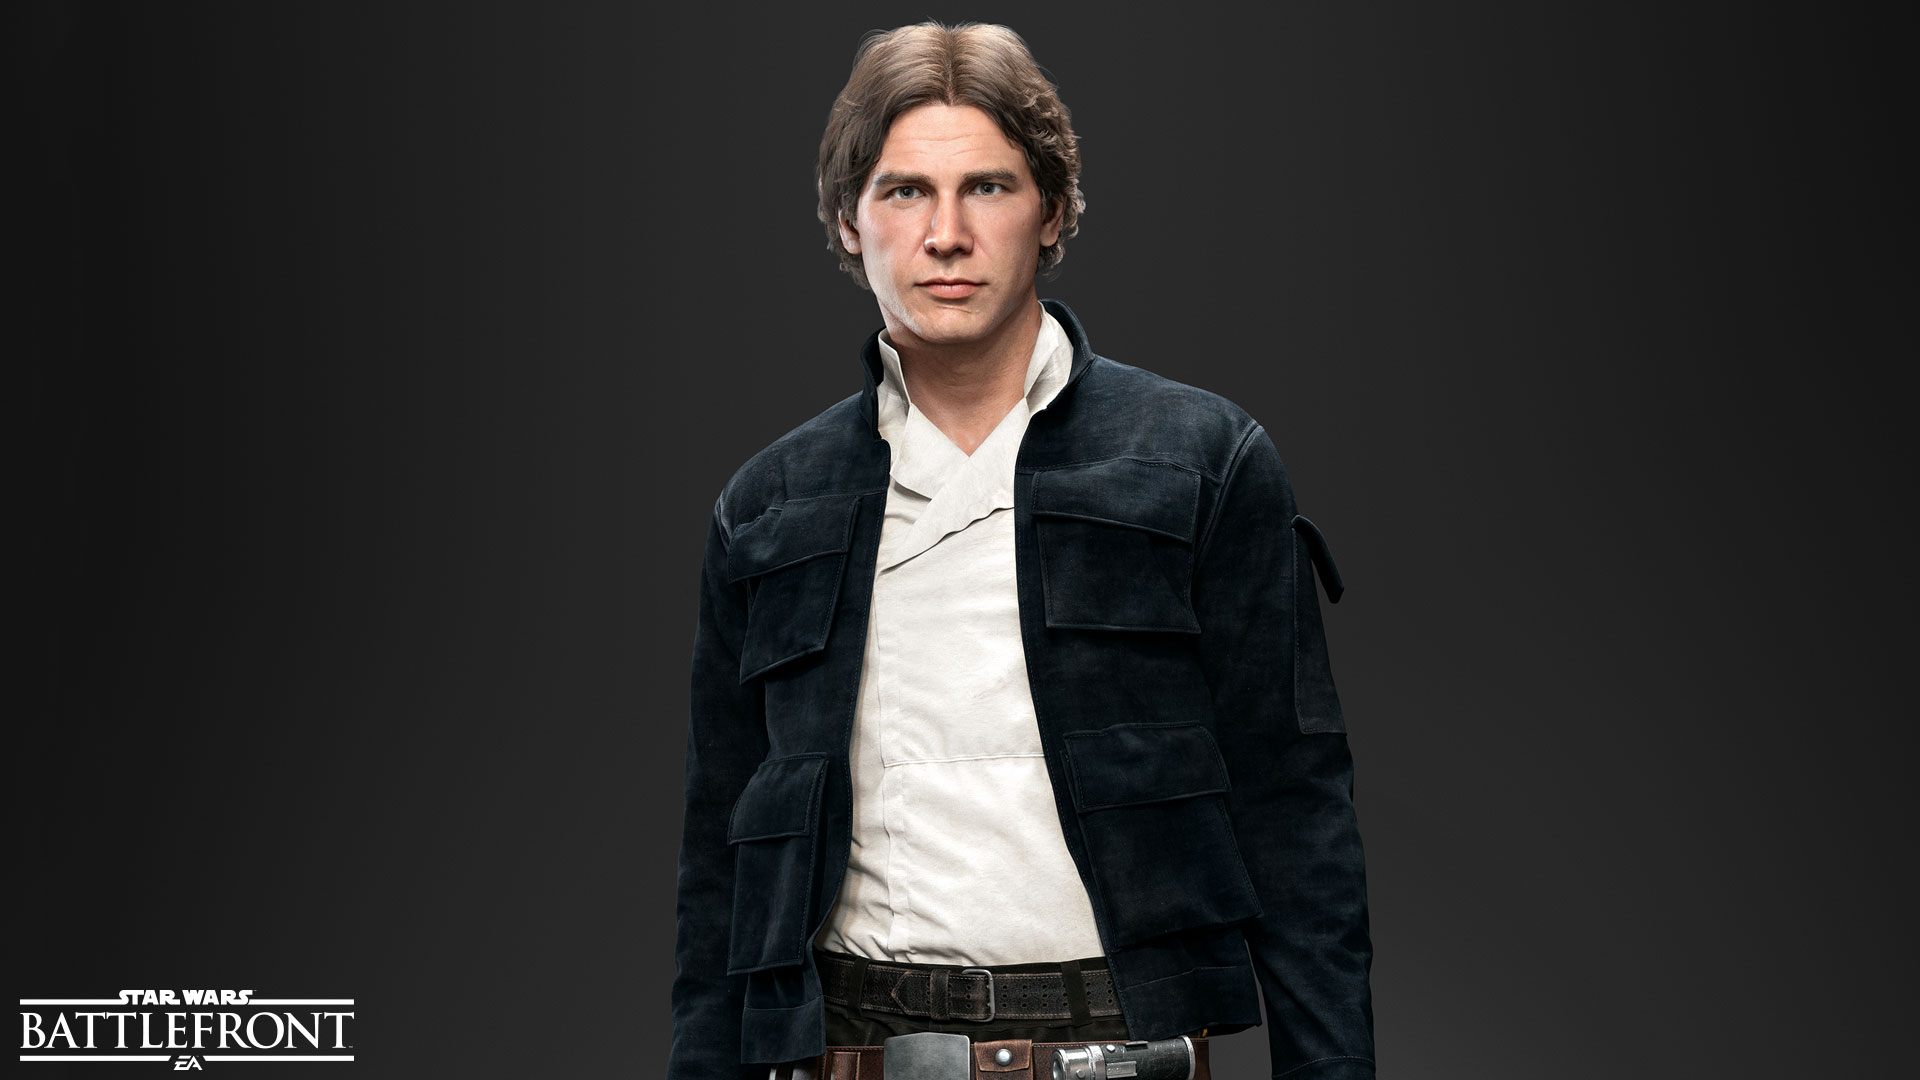 There's a Han Solo Fridge Bundled With Battlefront, but Good Luck Finding It